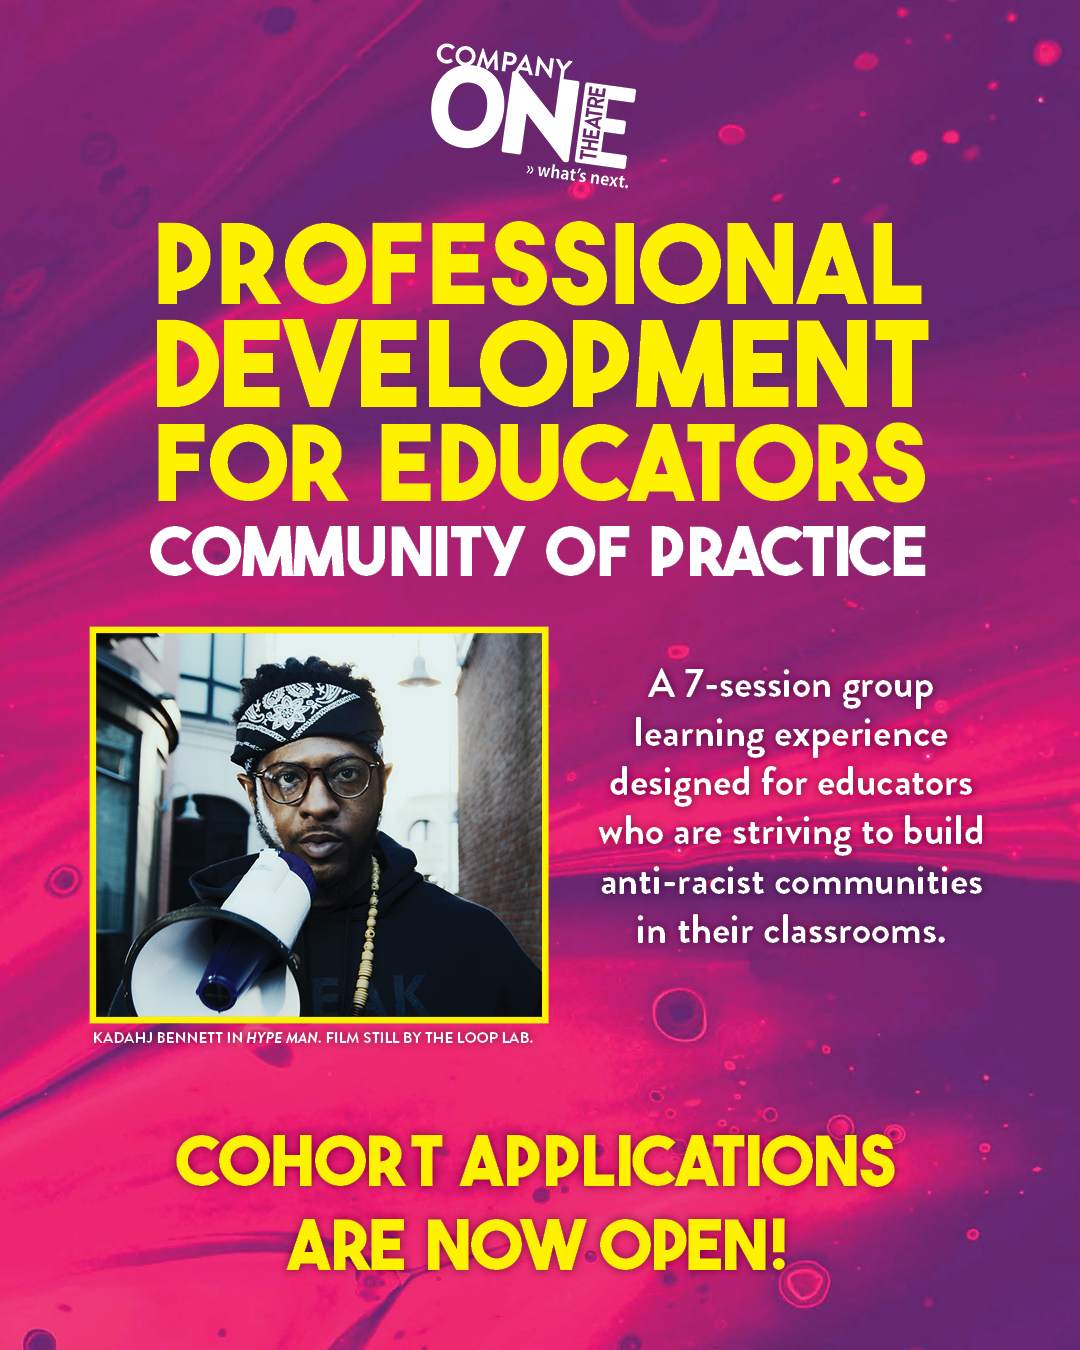 Company One Theatre Professional Development for Educators: Community of Practice  An 8-week group learning experience designed for educators who are striving to build anti-racist communities in their classrooms.  VIRTUAL INFO SESSIONS  October 17 from 3:00-4:00pm  November 14 from 5:30-6:30pm   Pictured: Kadahj Bennett in Hype Man. Film still by The Loop Lab.